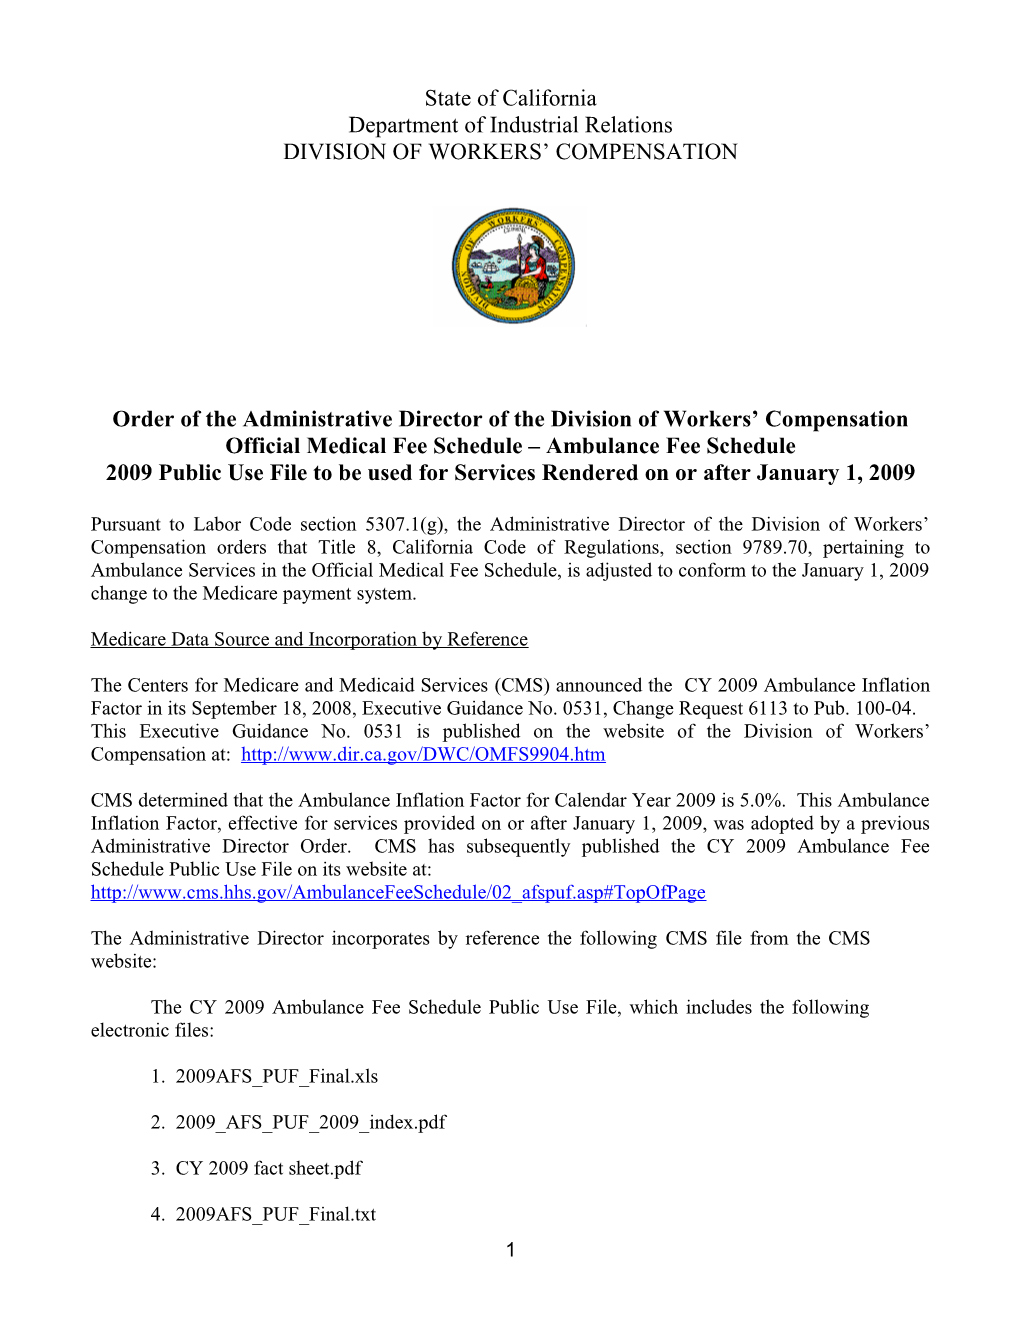 Order of the Administrative Director of the Division of Workers Compensation